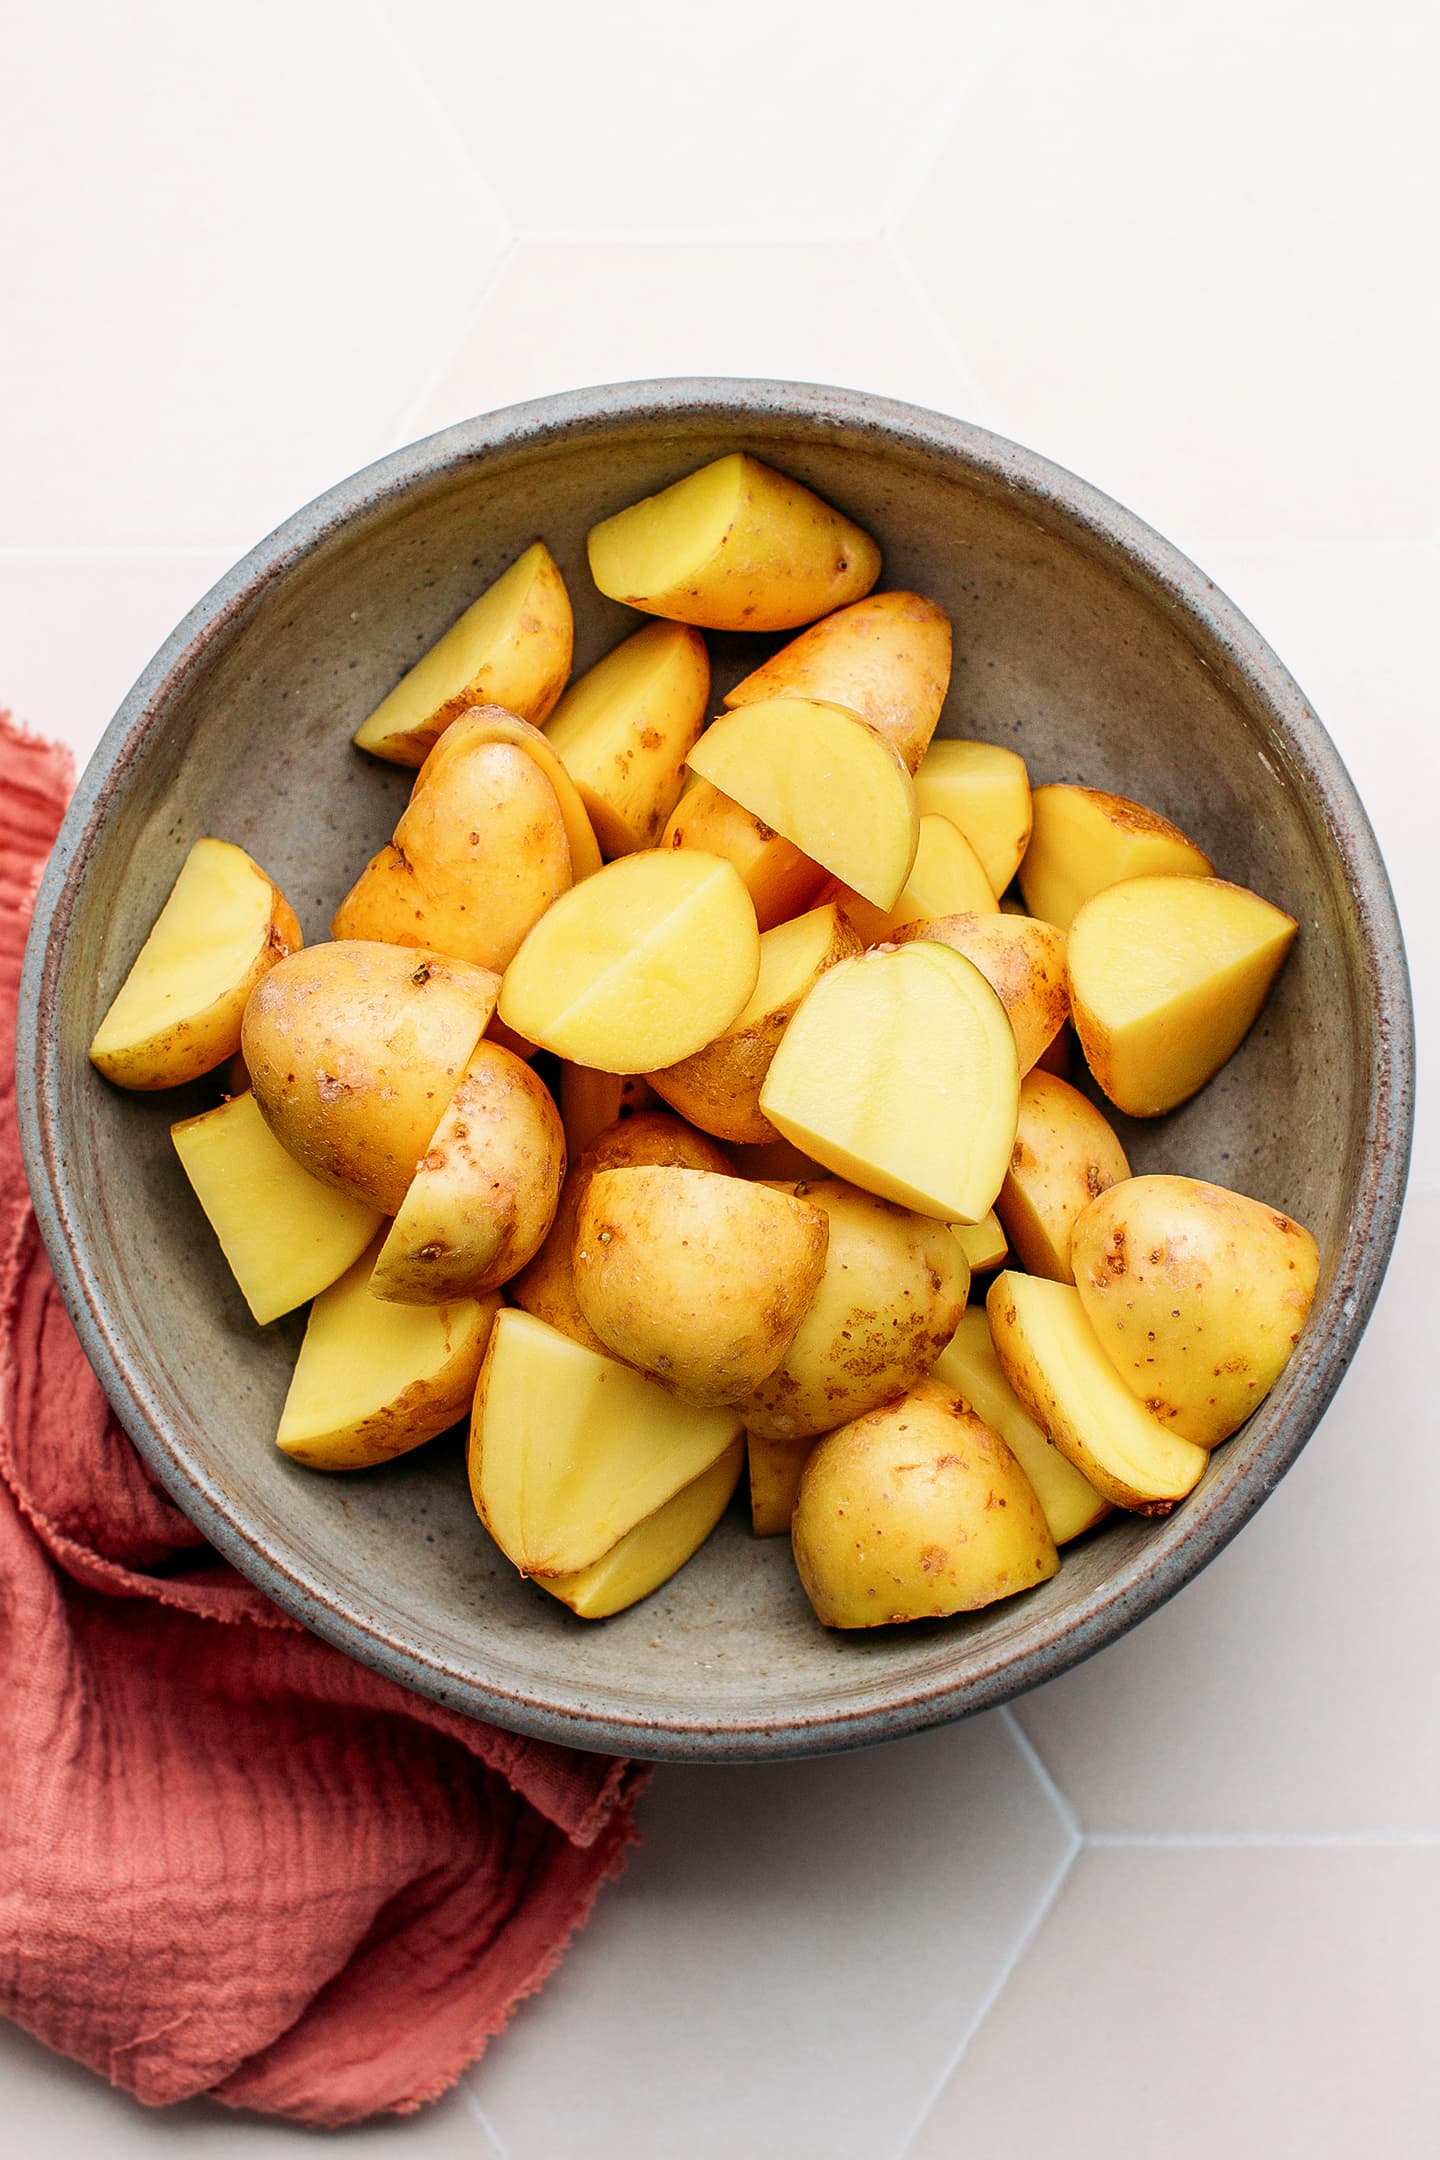 Quartered potatoes in a bowl.